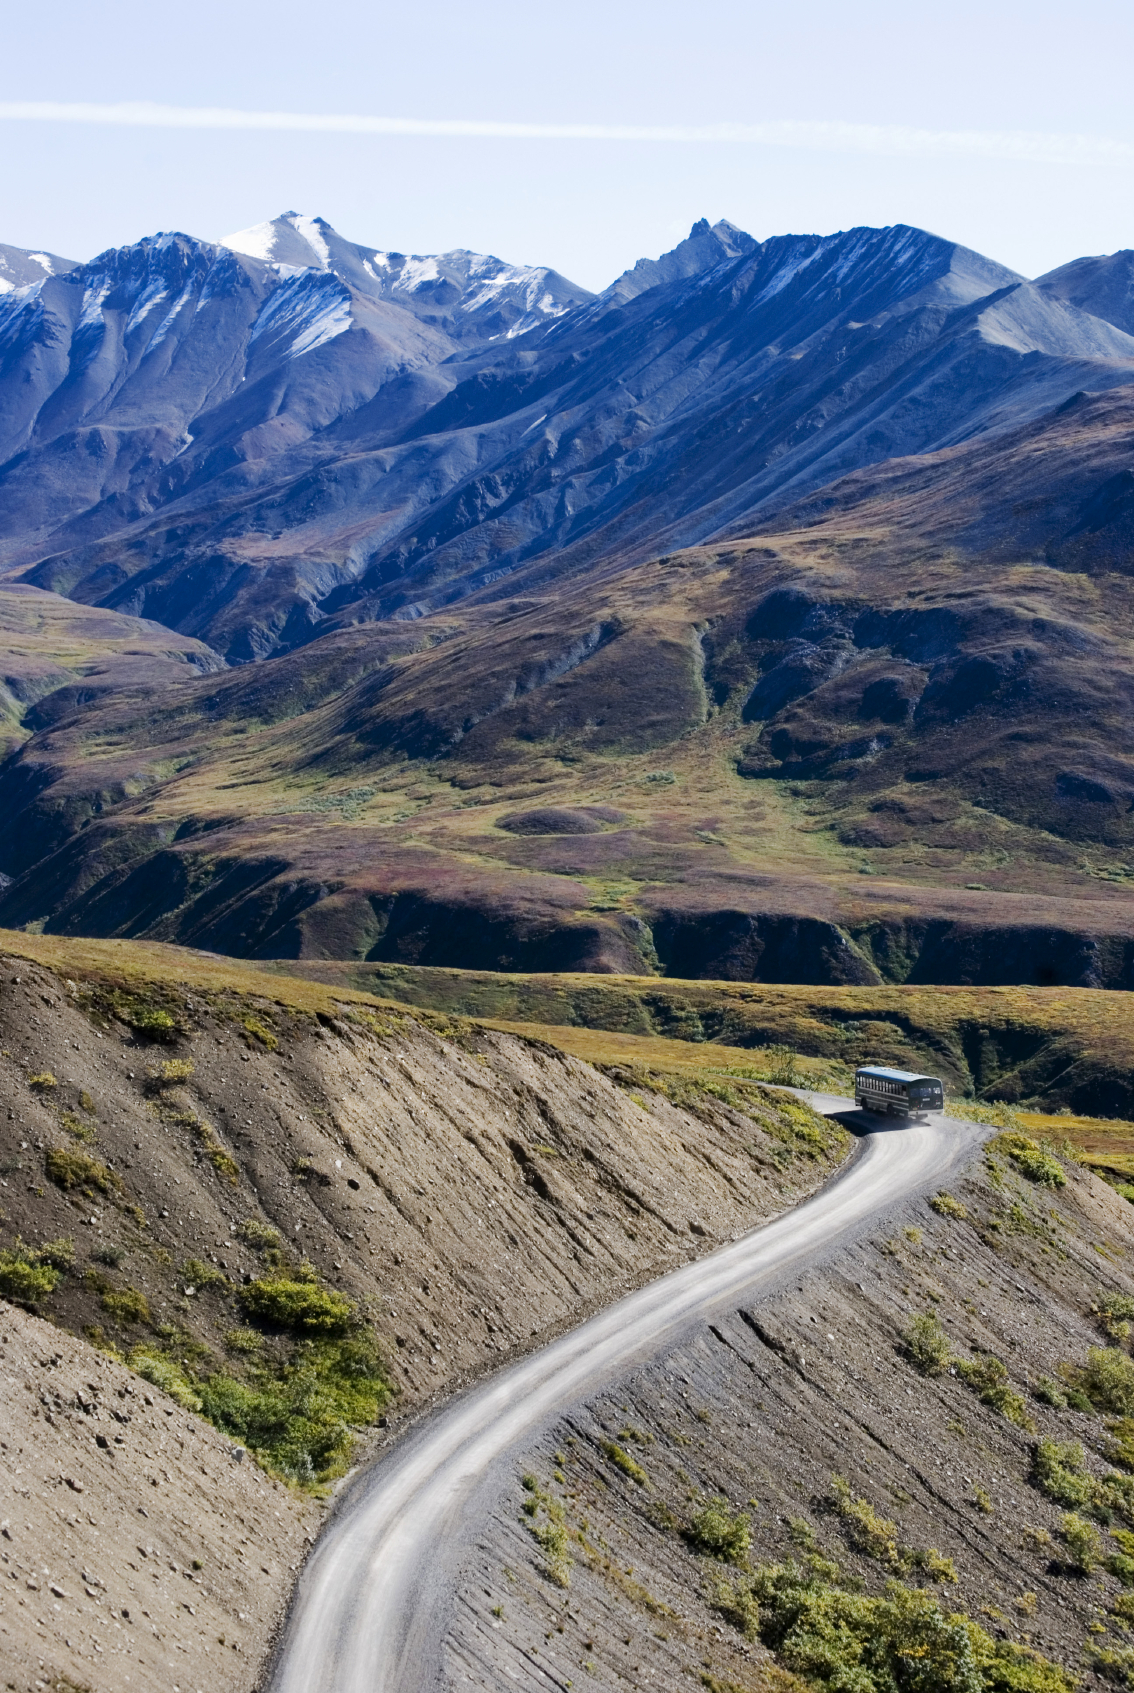 The Denali Road Lottery allows a select few to bring their personal vehicles into the park